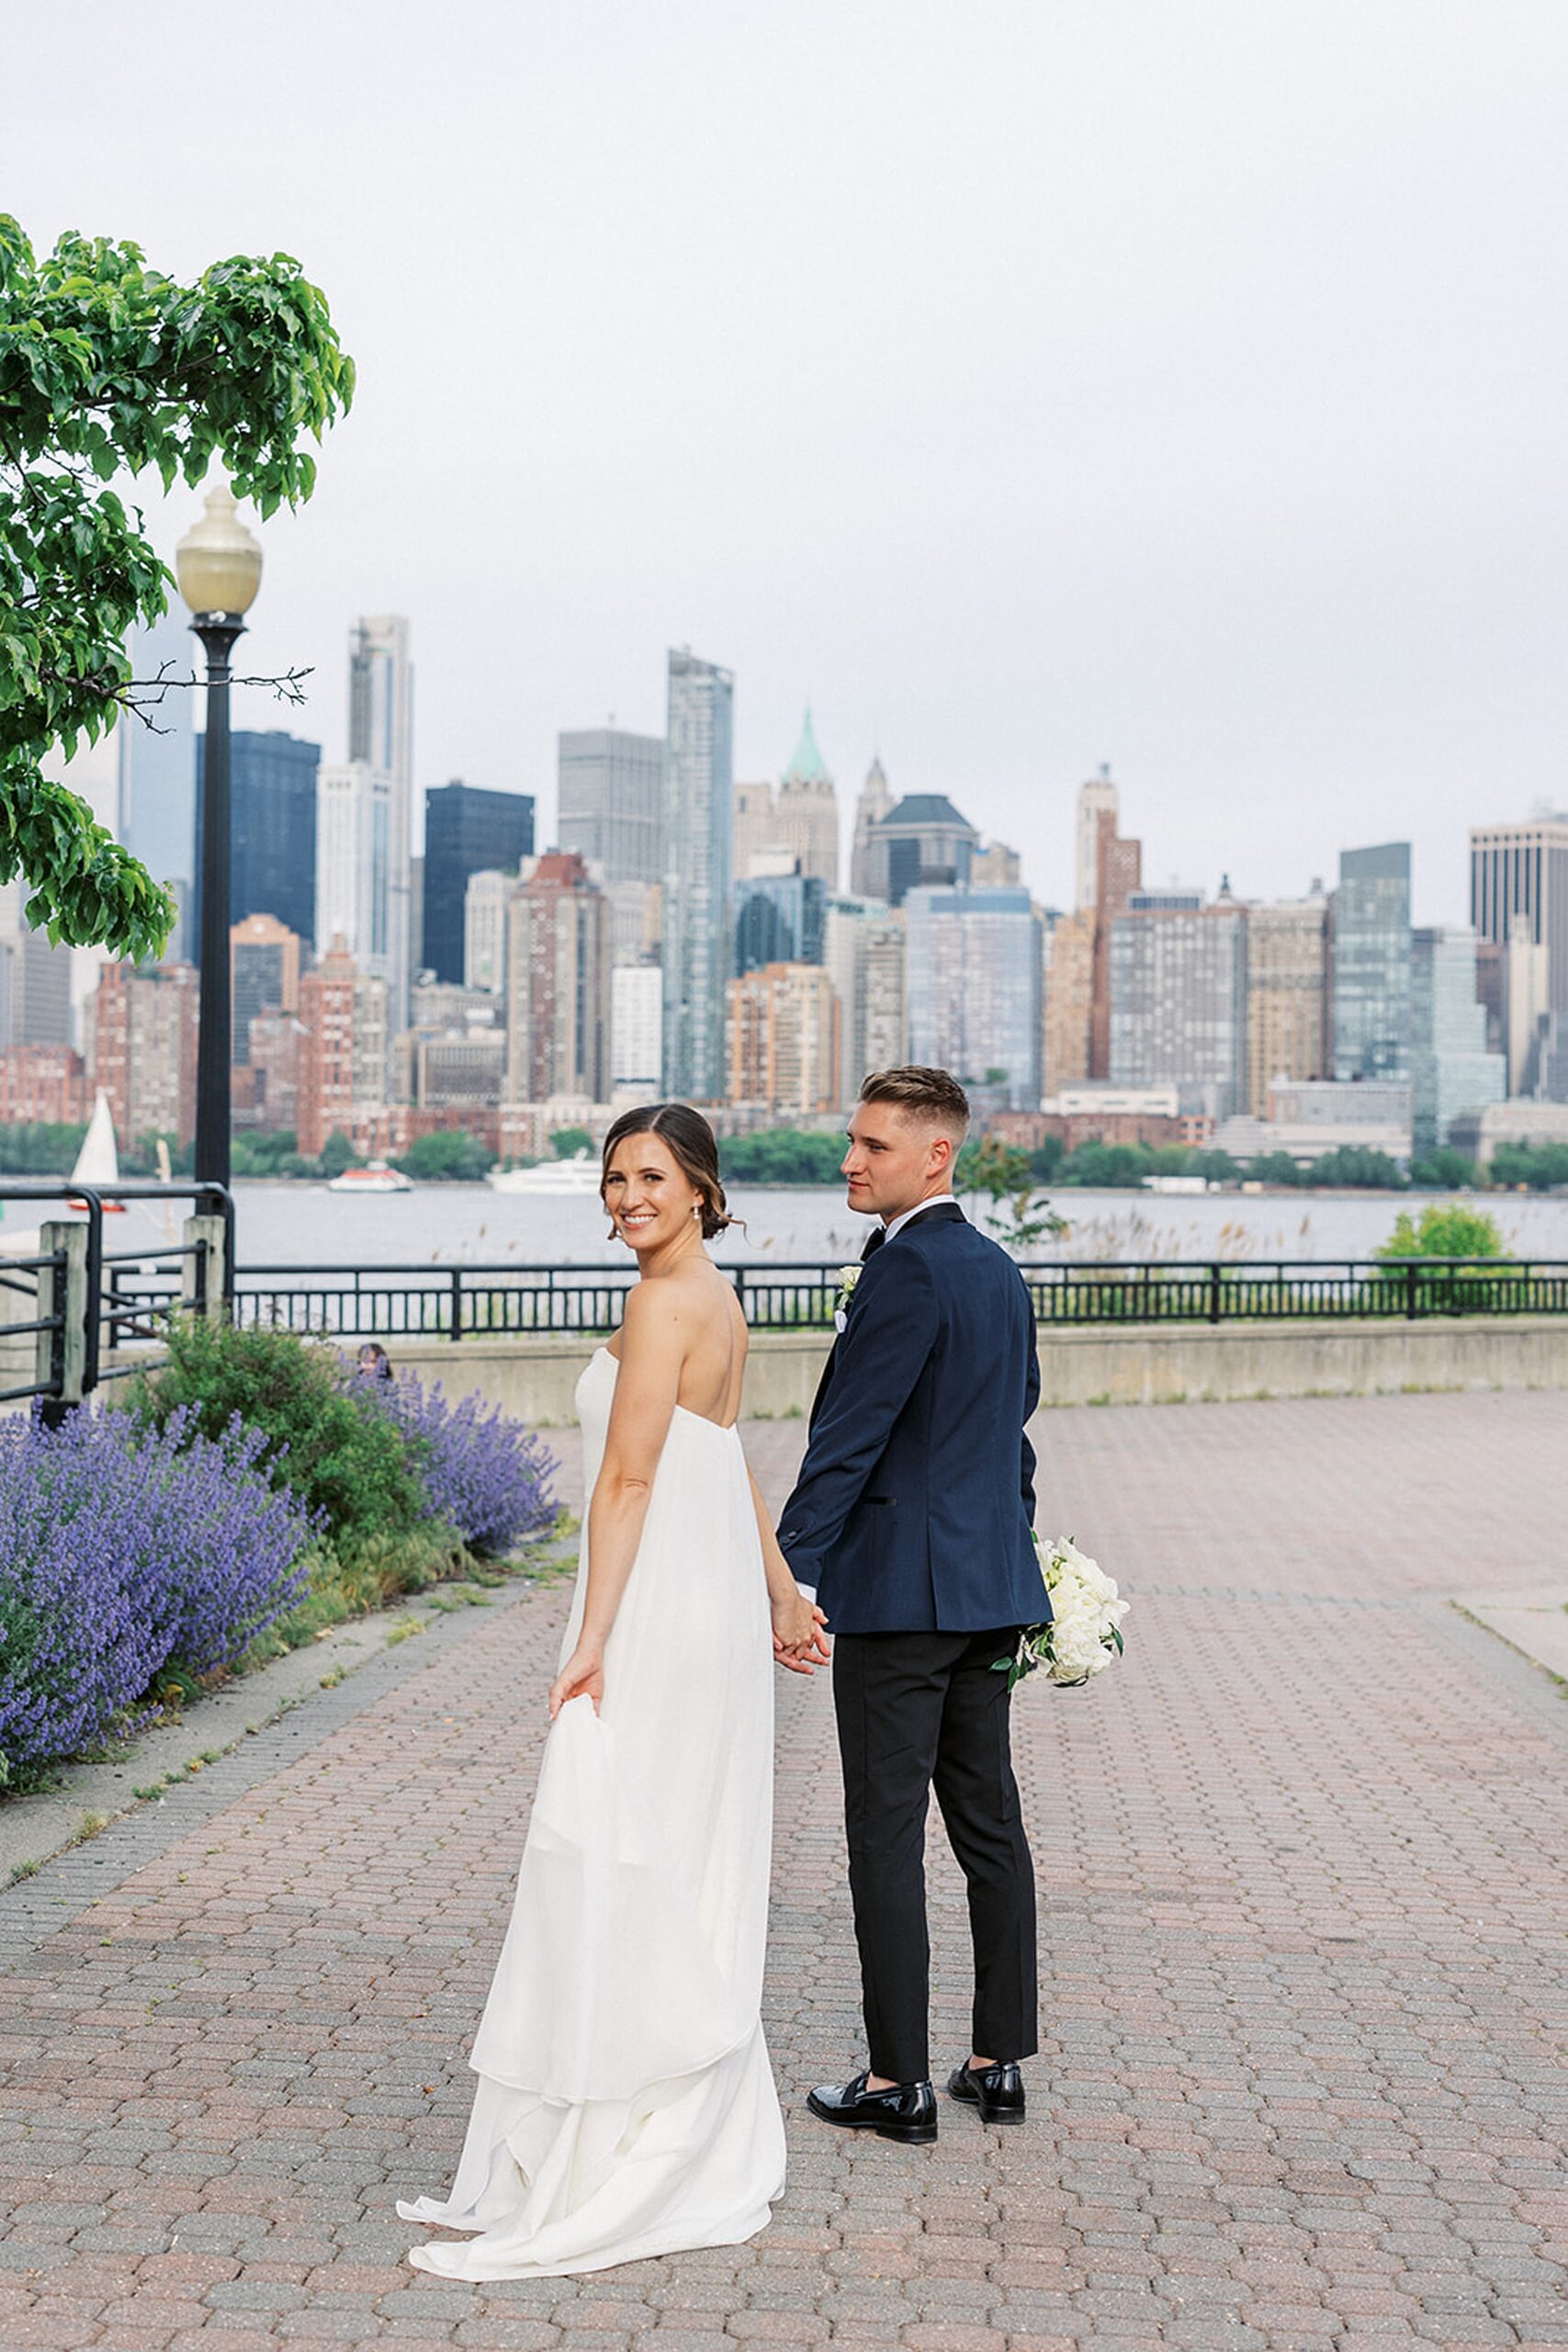 Newlyweds walk hand in hand through a park across the river from New York City